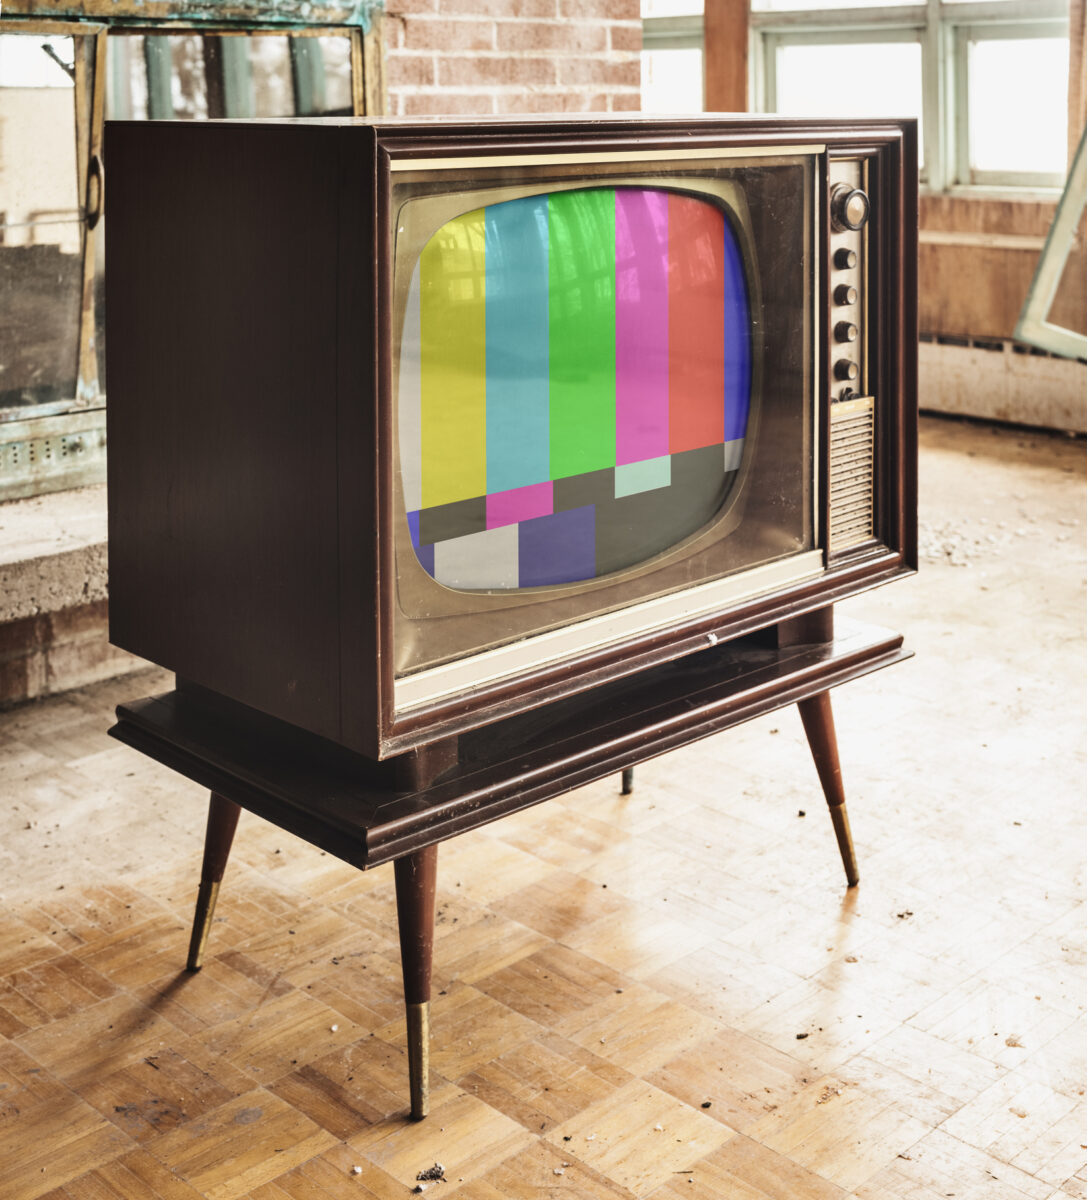 tv with test pattern